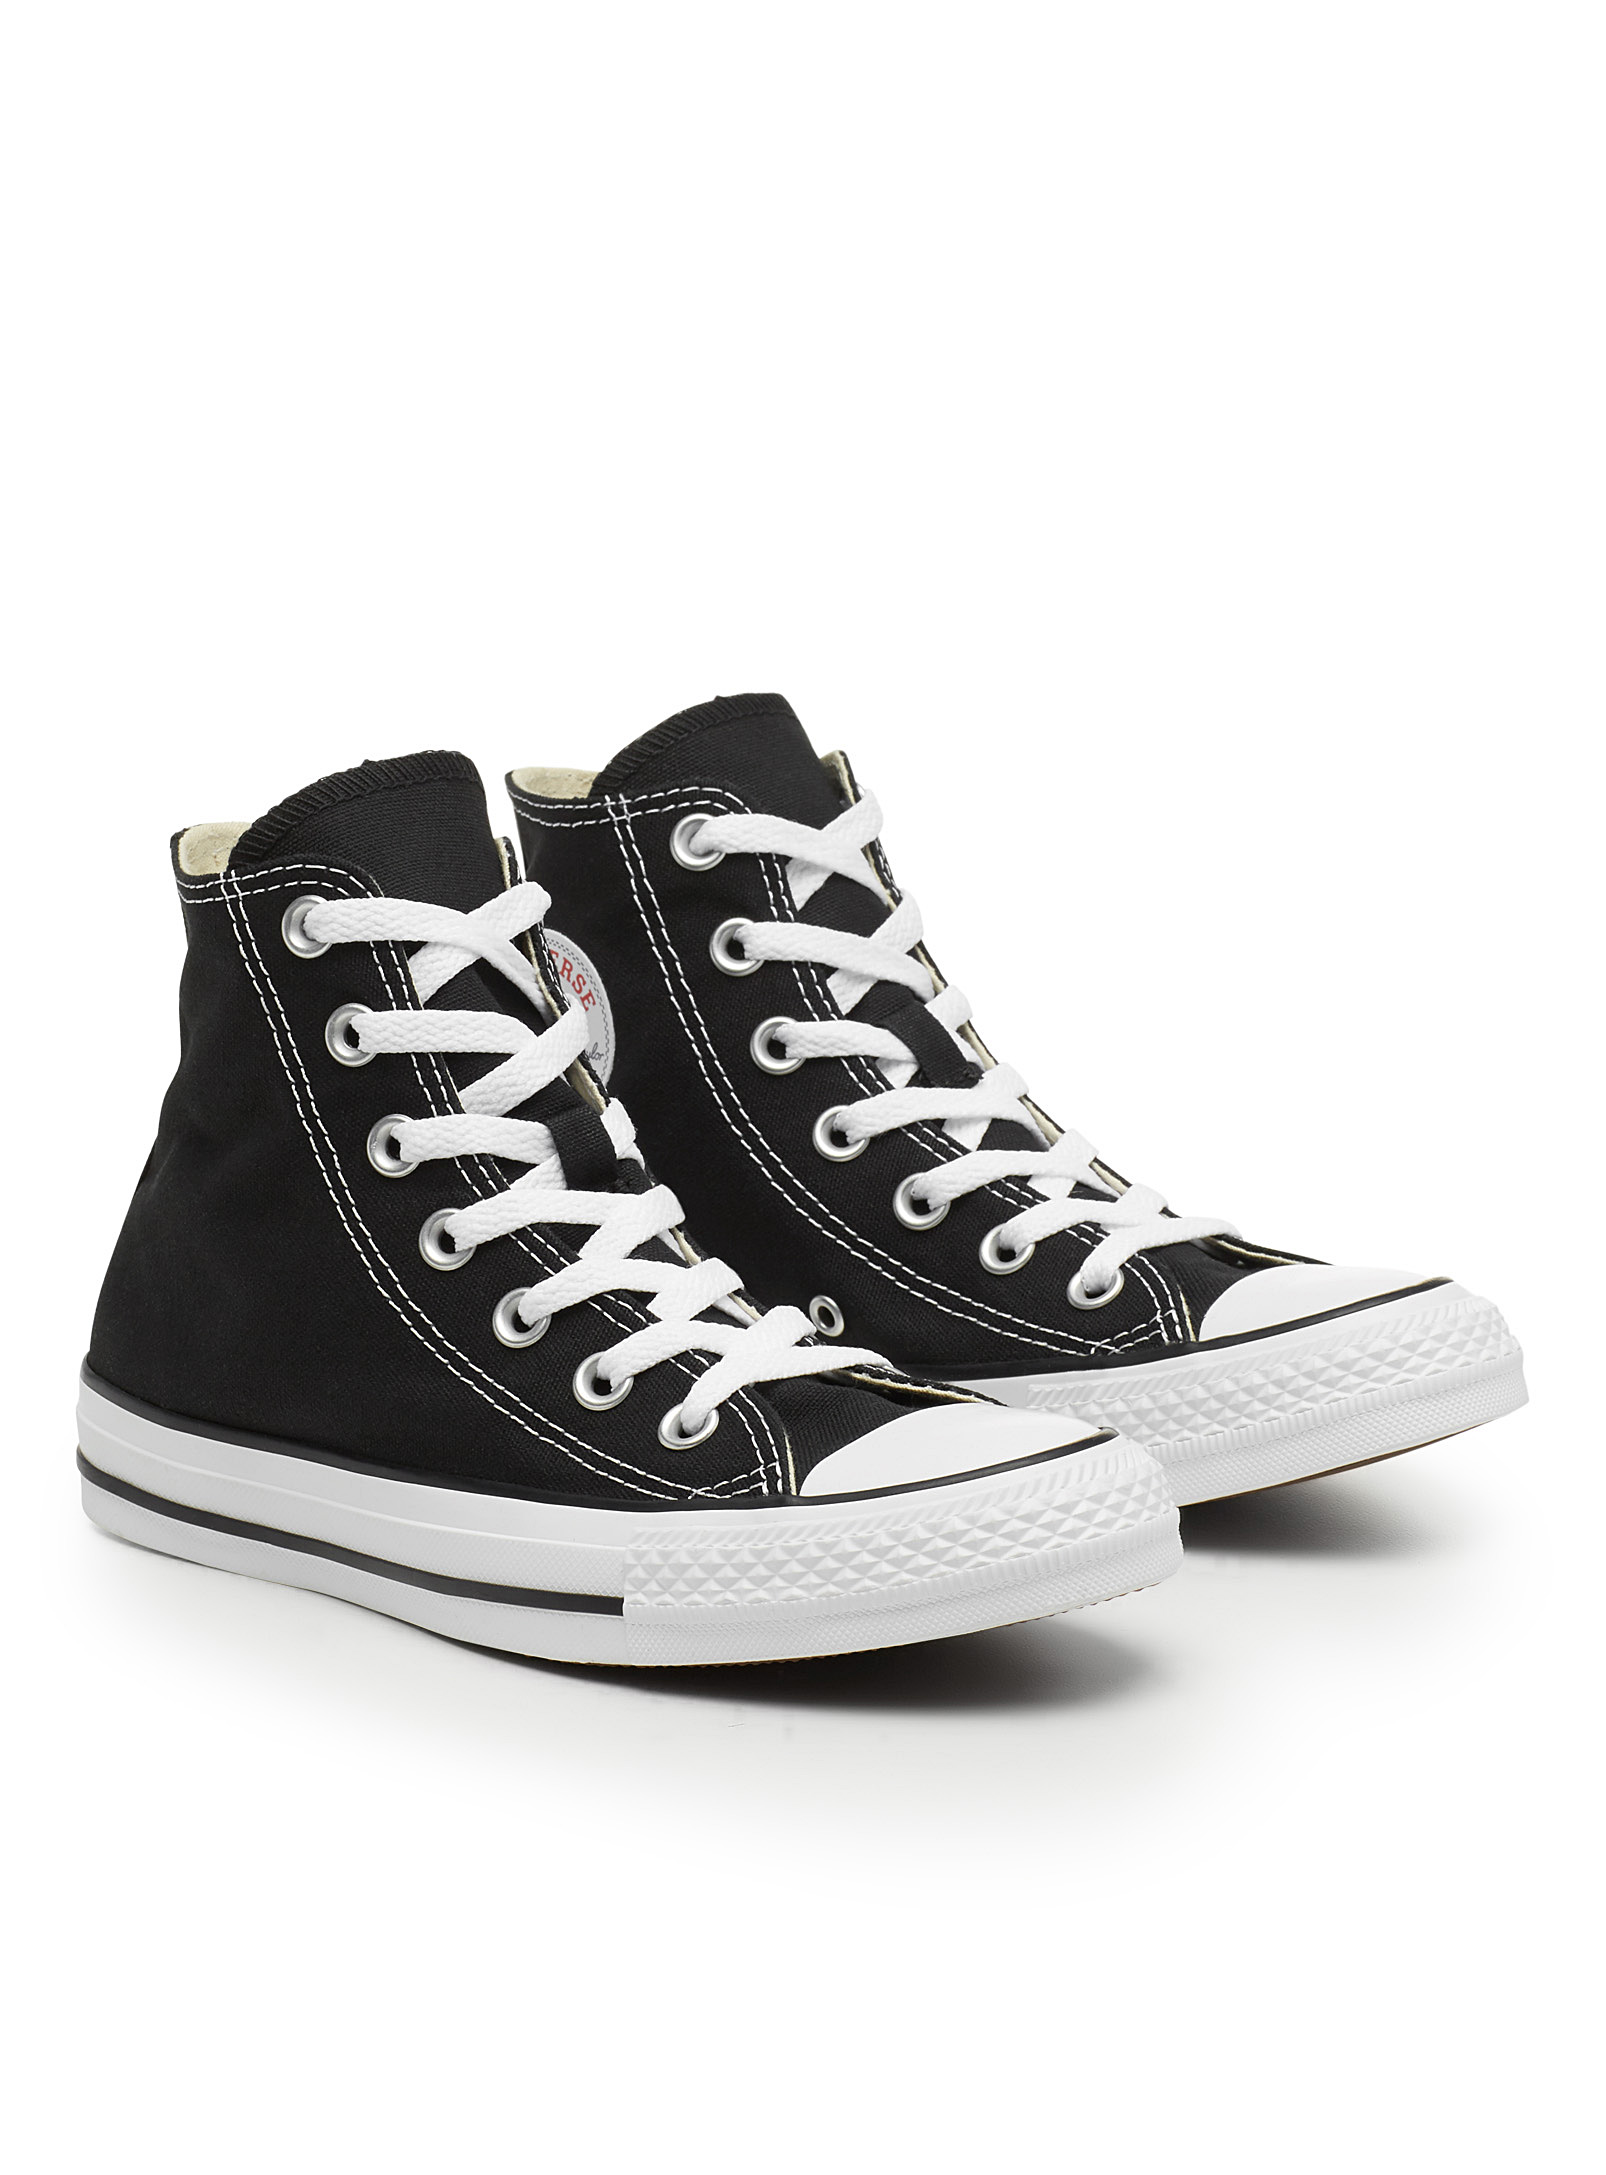 Converse - Chaussures Le Sneaker Chuck Taylor All Star High Top Femme